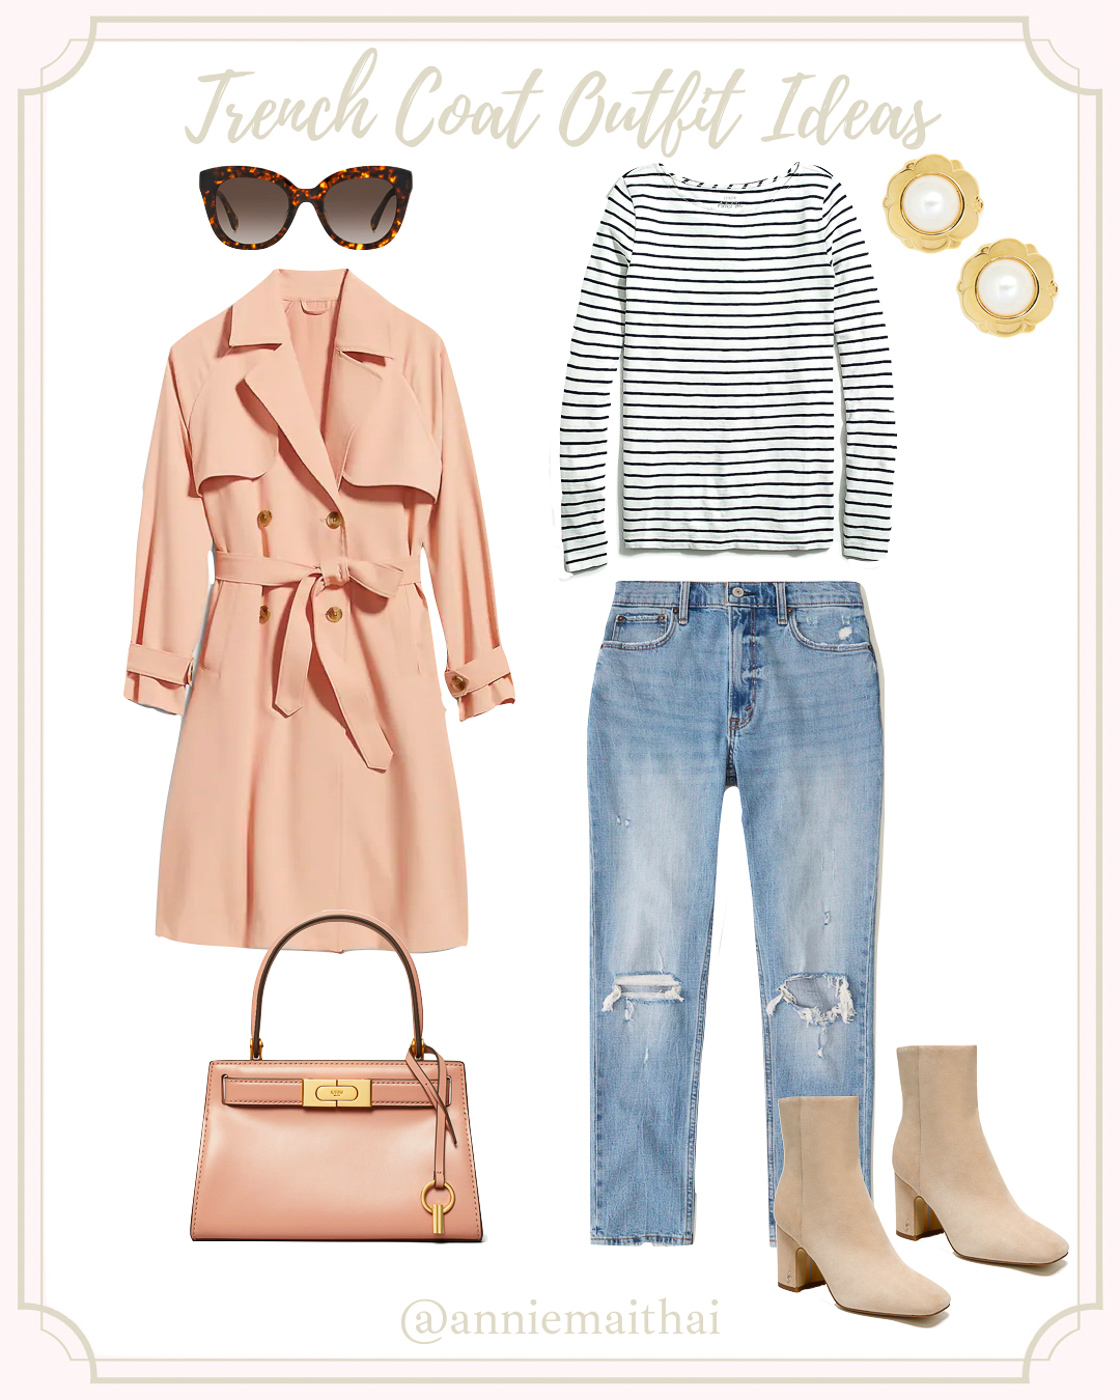 Trench Coat Outfit Ideas - Stylish Petite